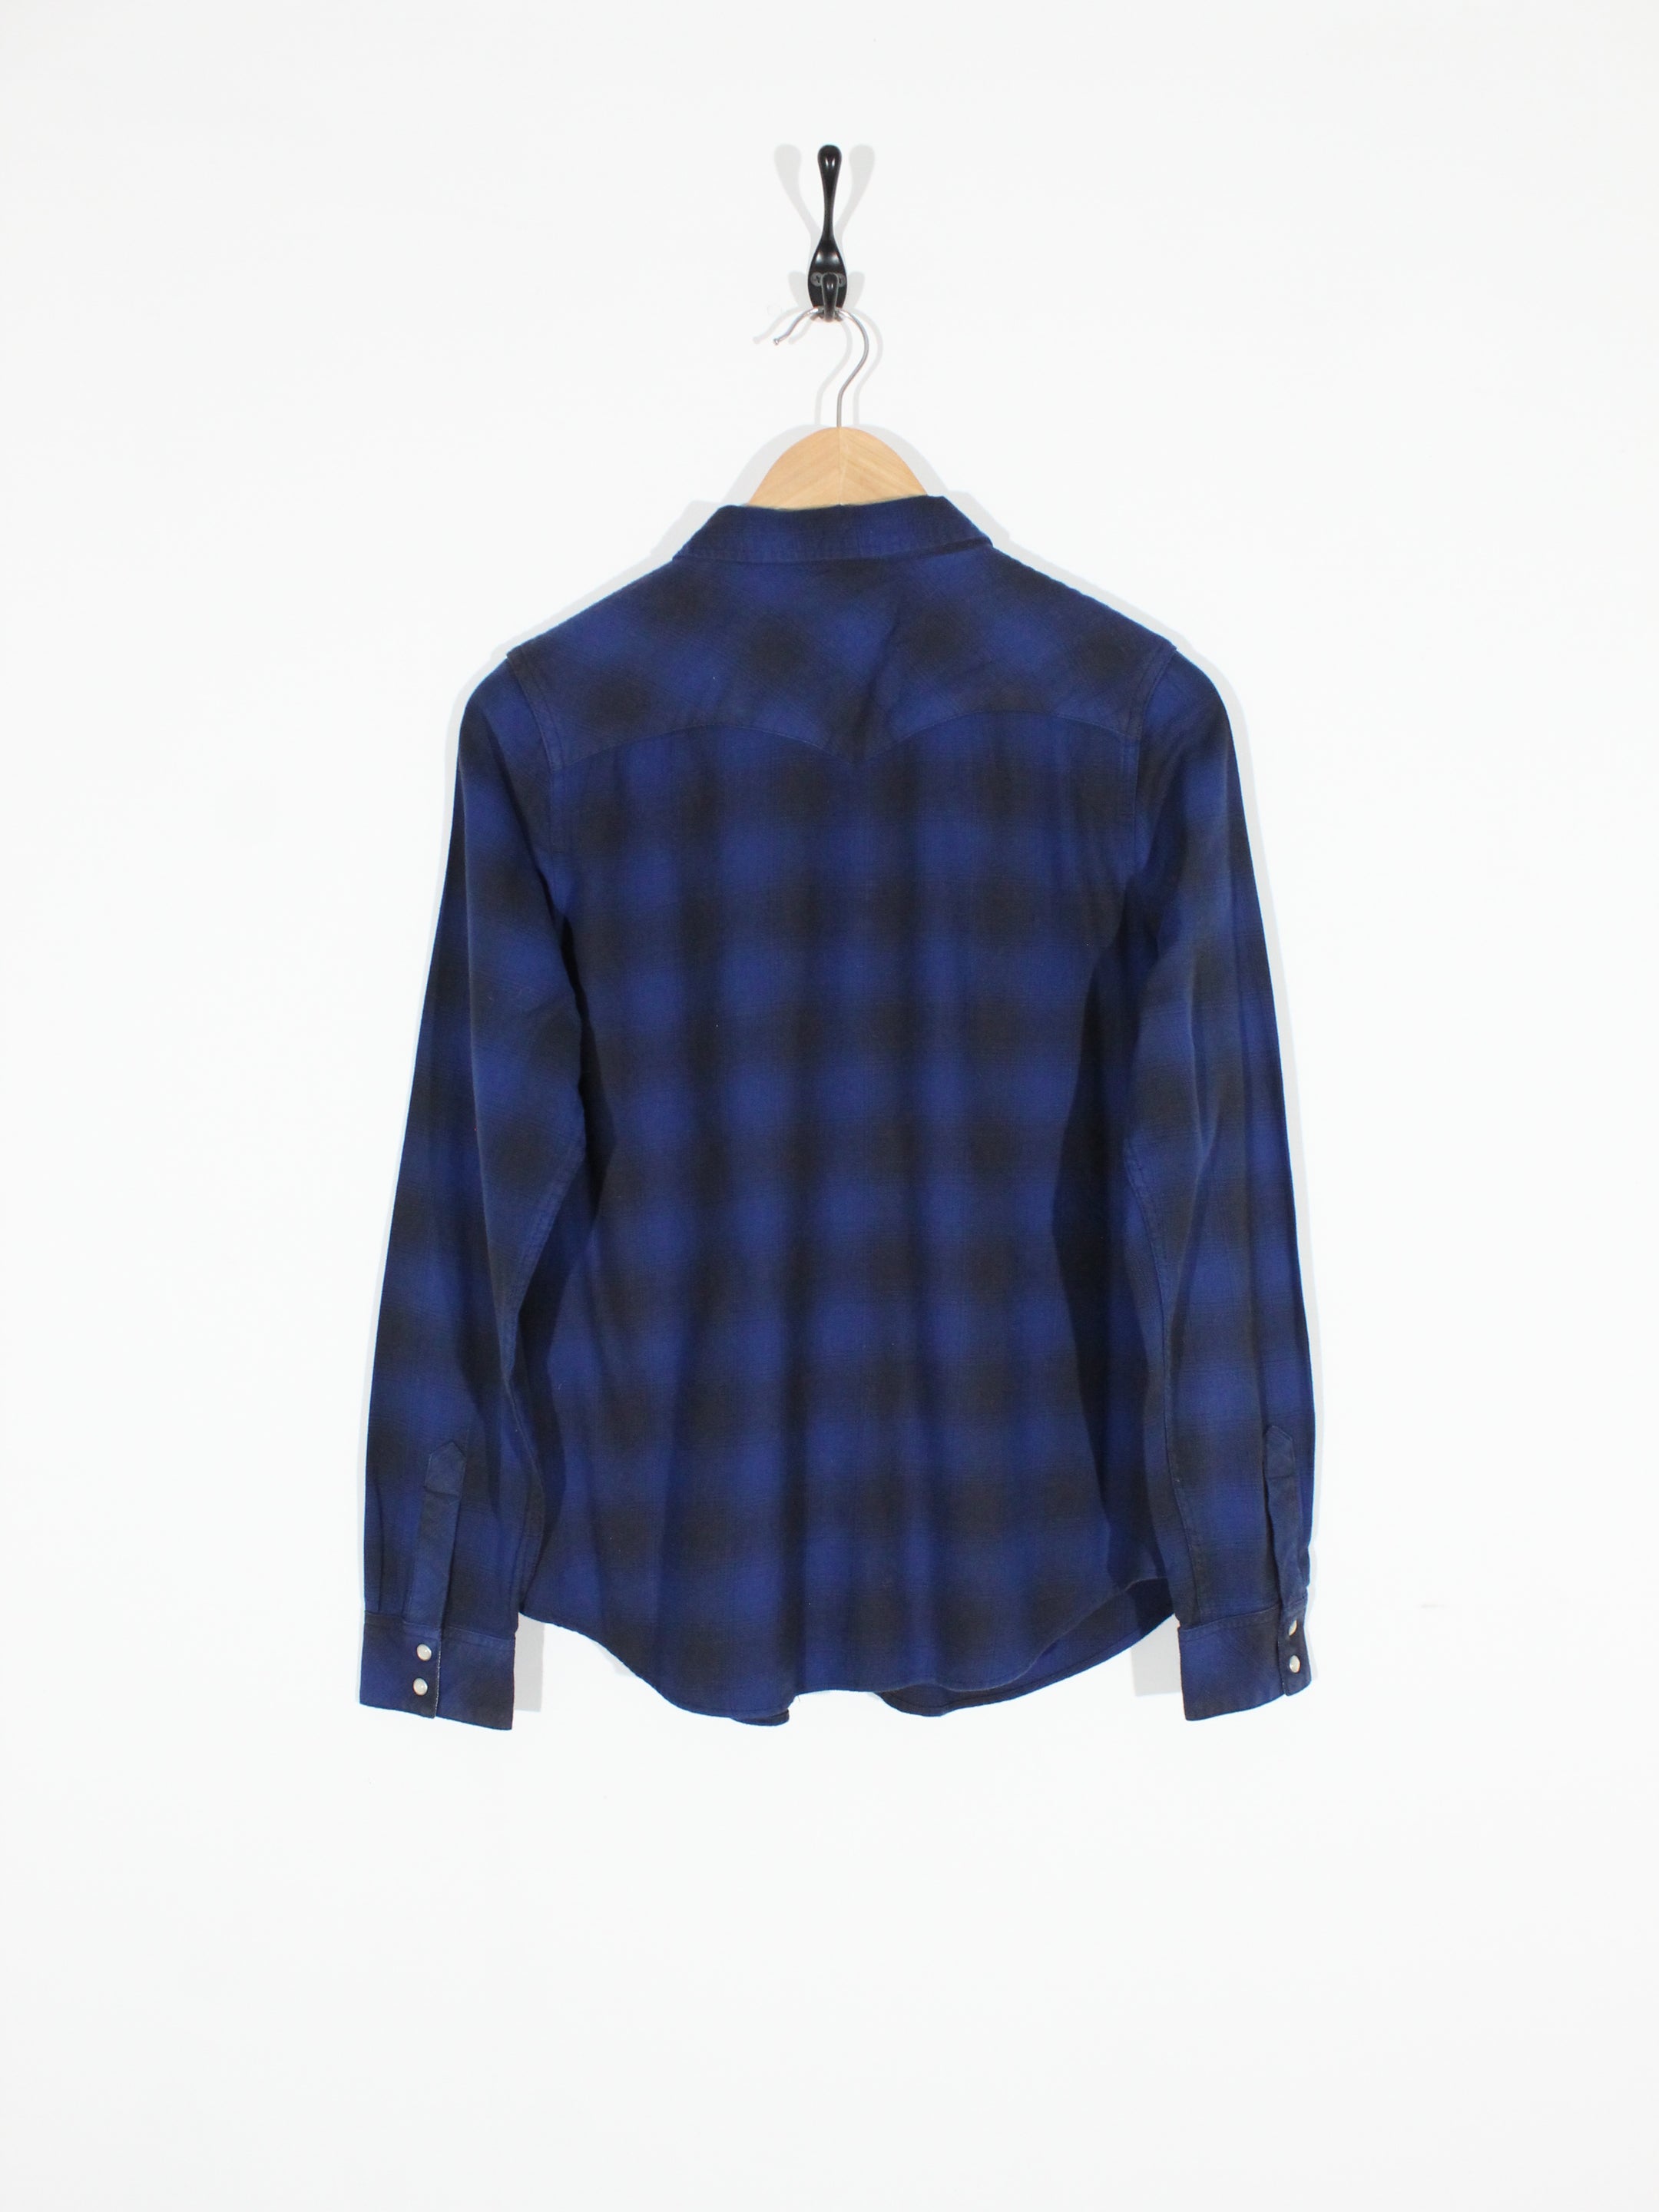 Levis Checked Flannel Shirt (M)